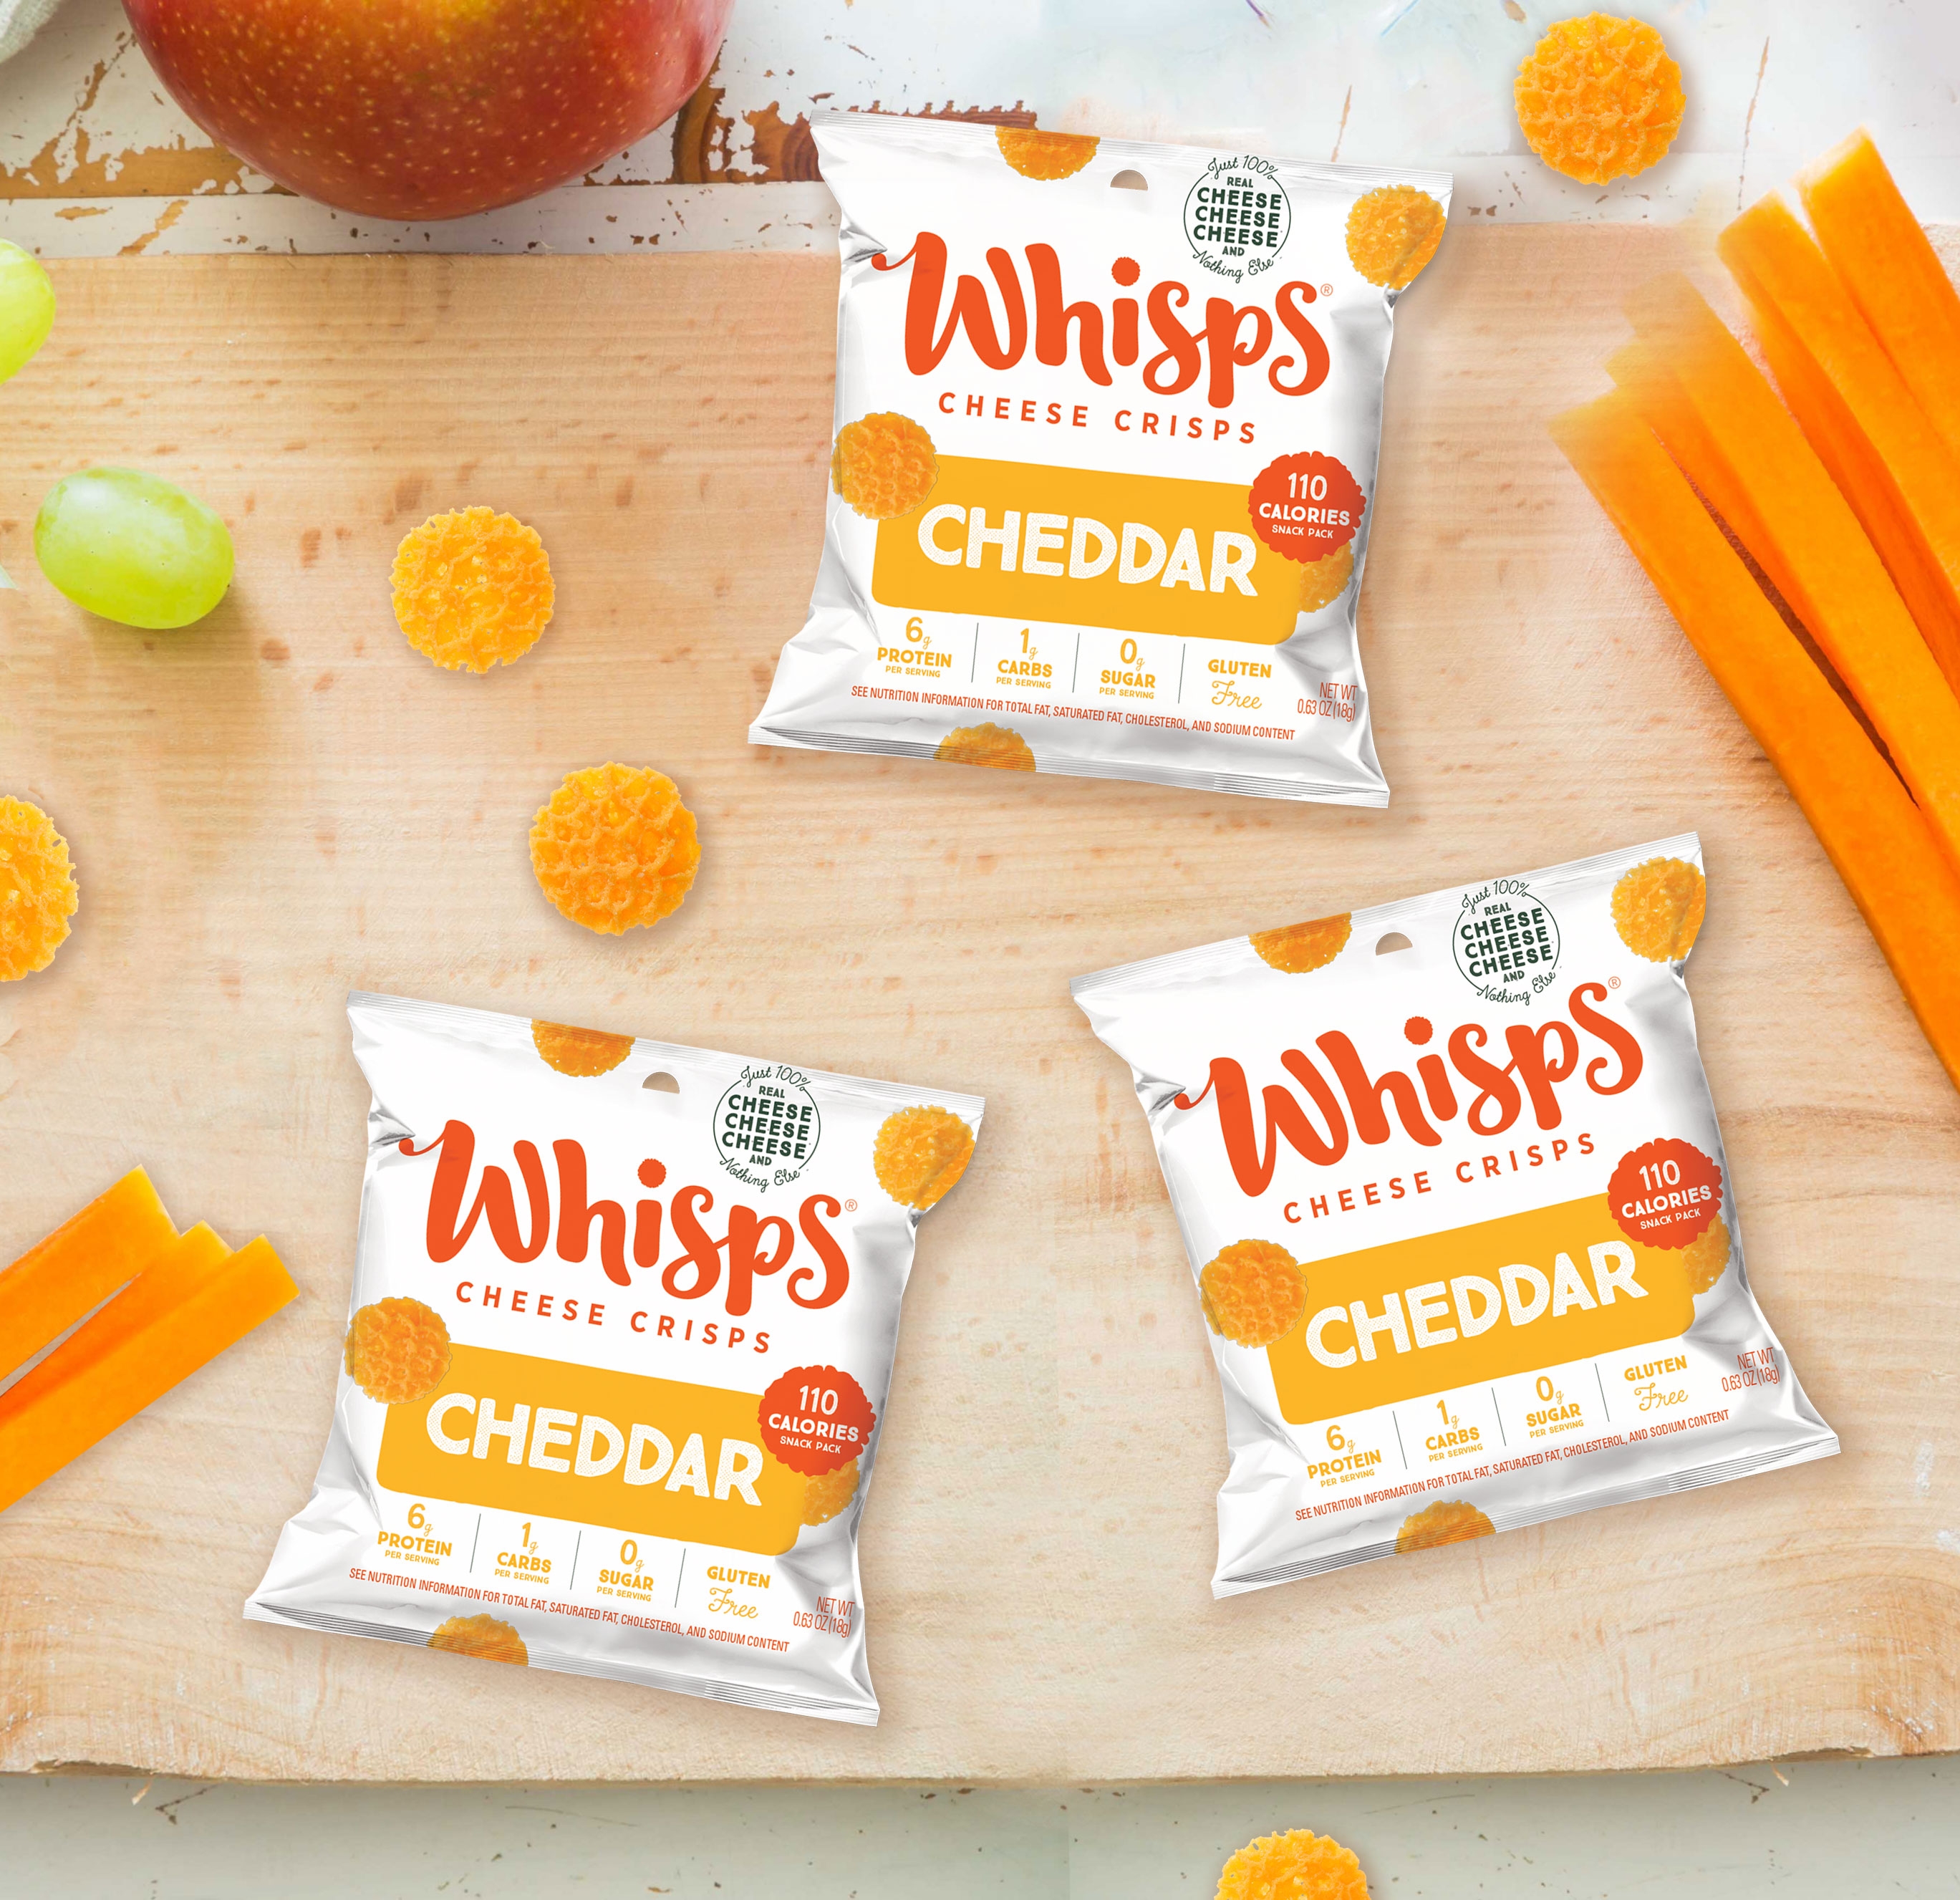 Whisps Cheddar Cheese Crisps, 0.63 oz, Keto Friendly Snacks, 6 Count - image 2 of 7